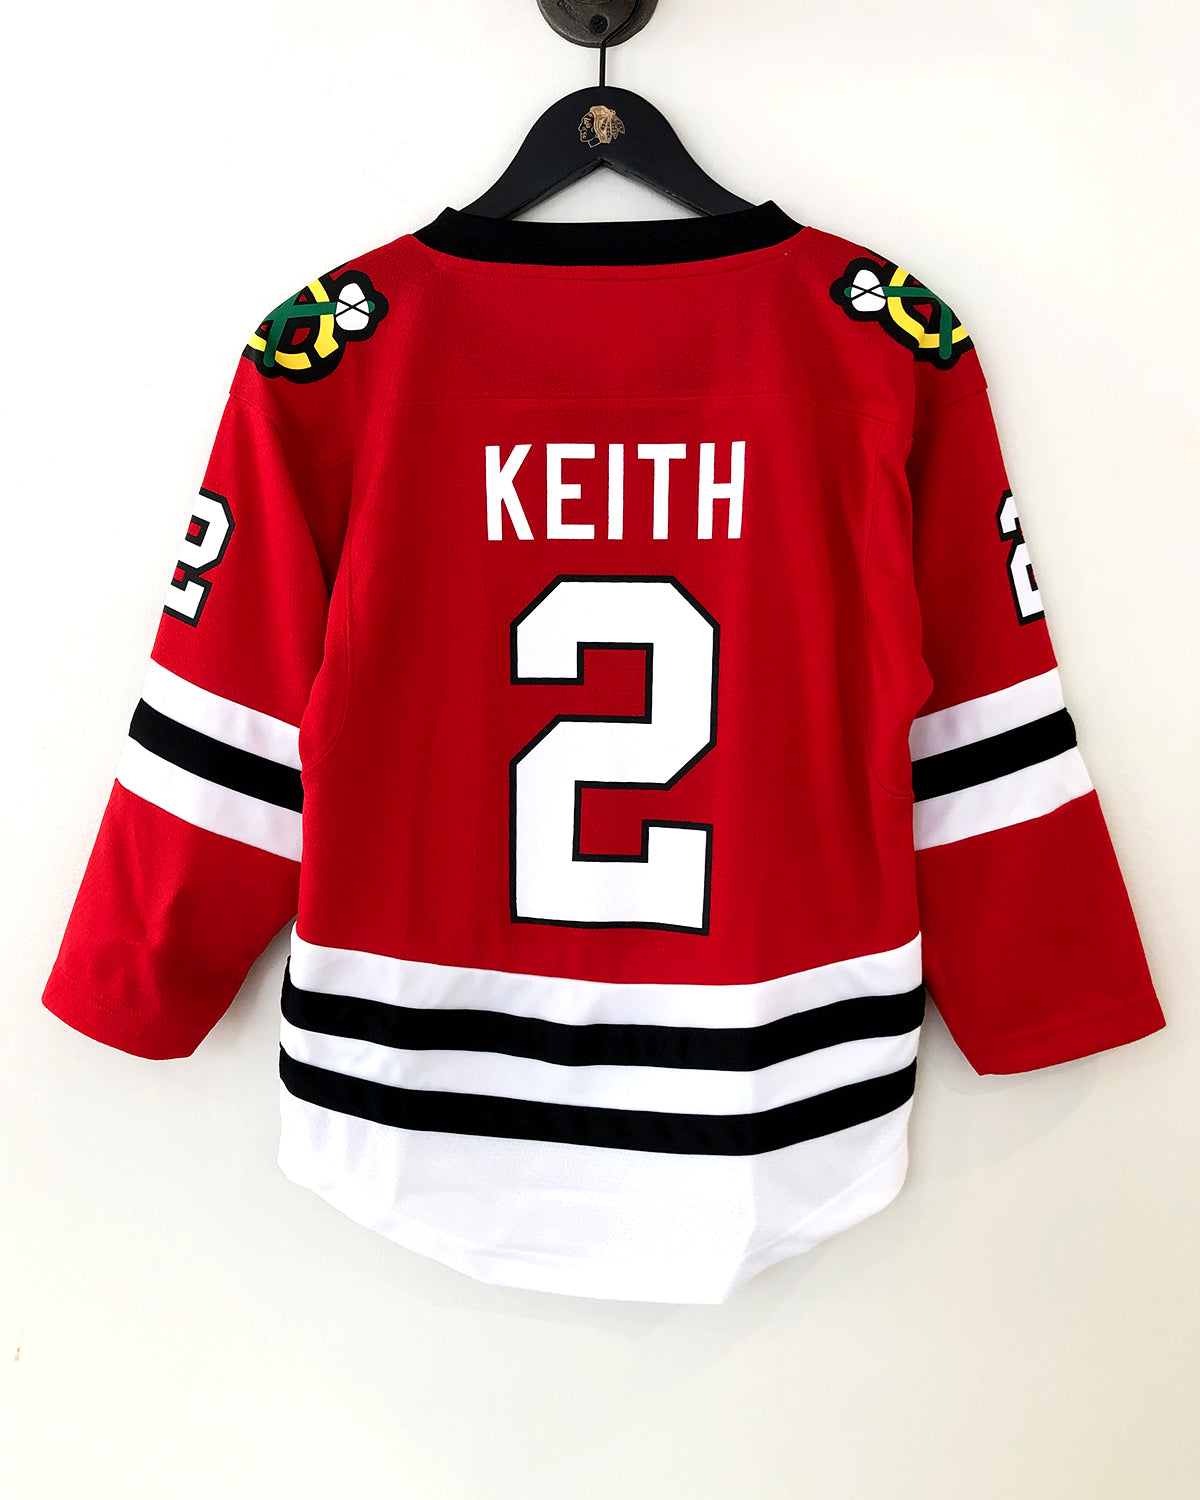 duncan keith official jersey